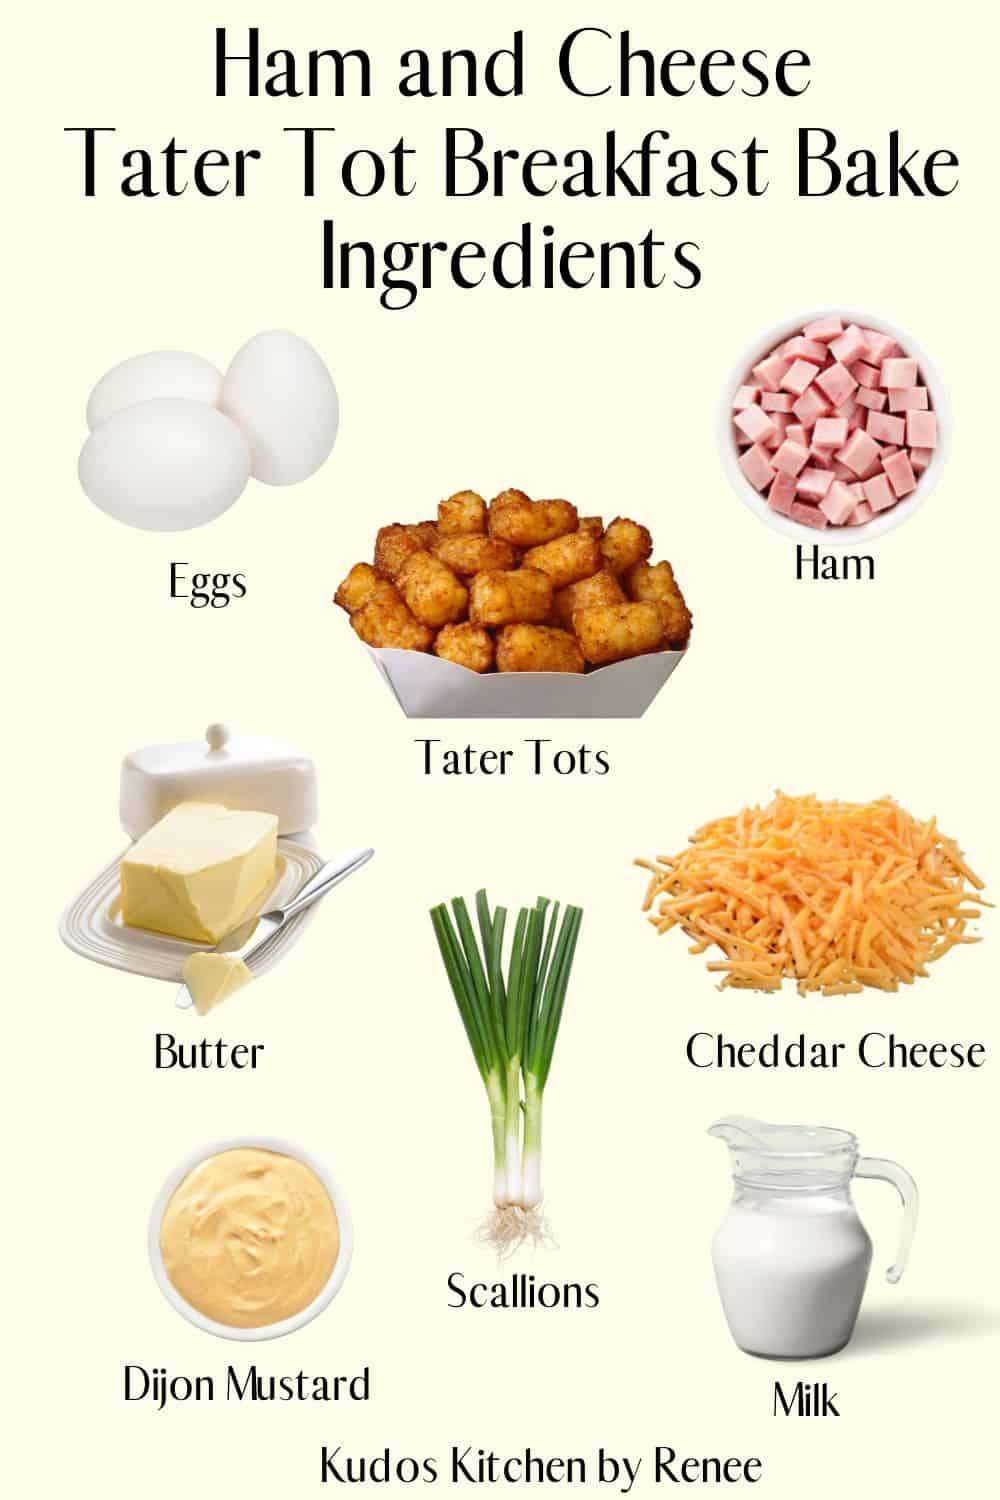 Visual ingredient list for making a Ham and Cheese Tater Tot Breakfast Bake.